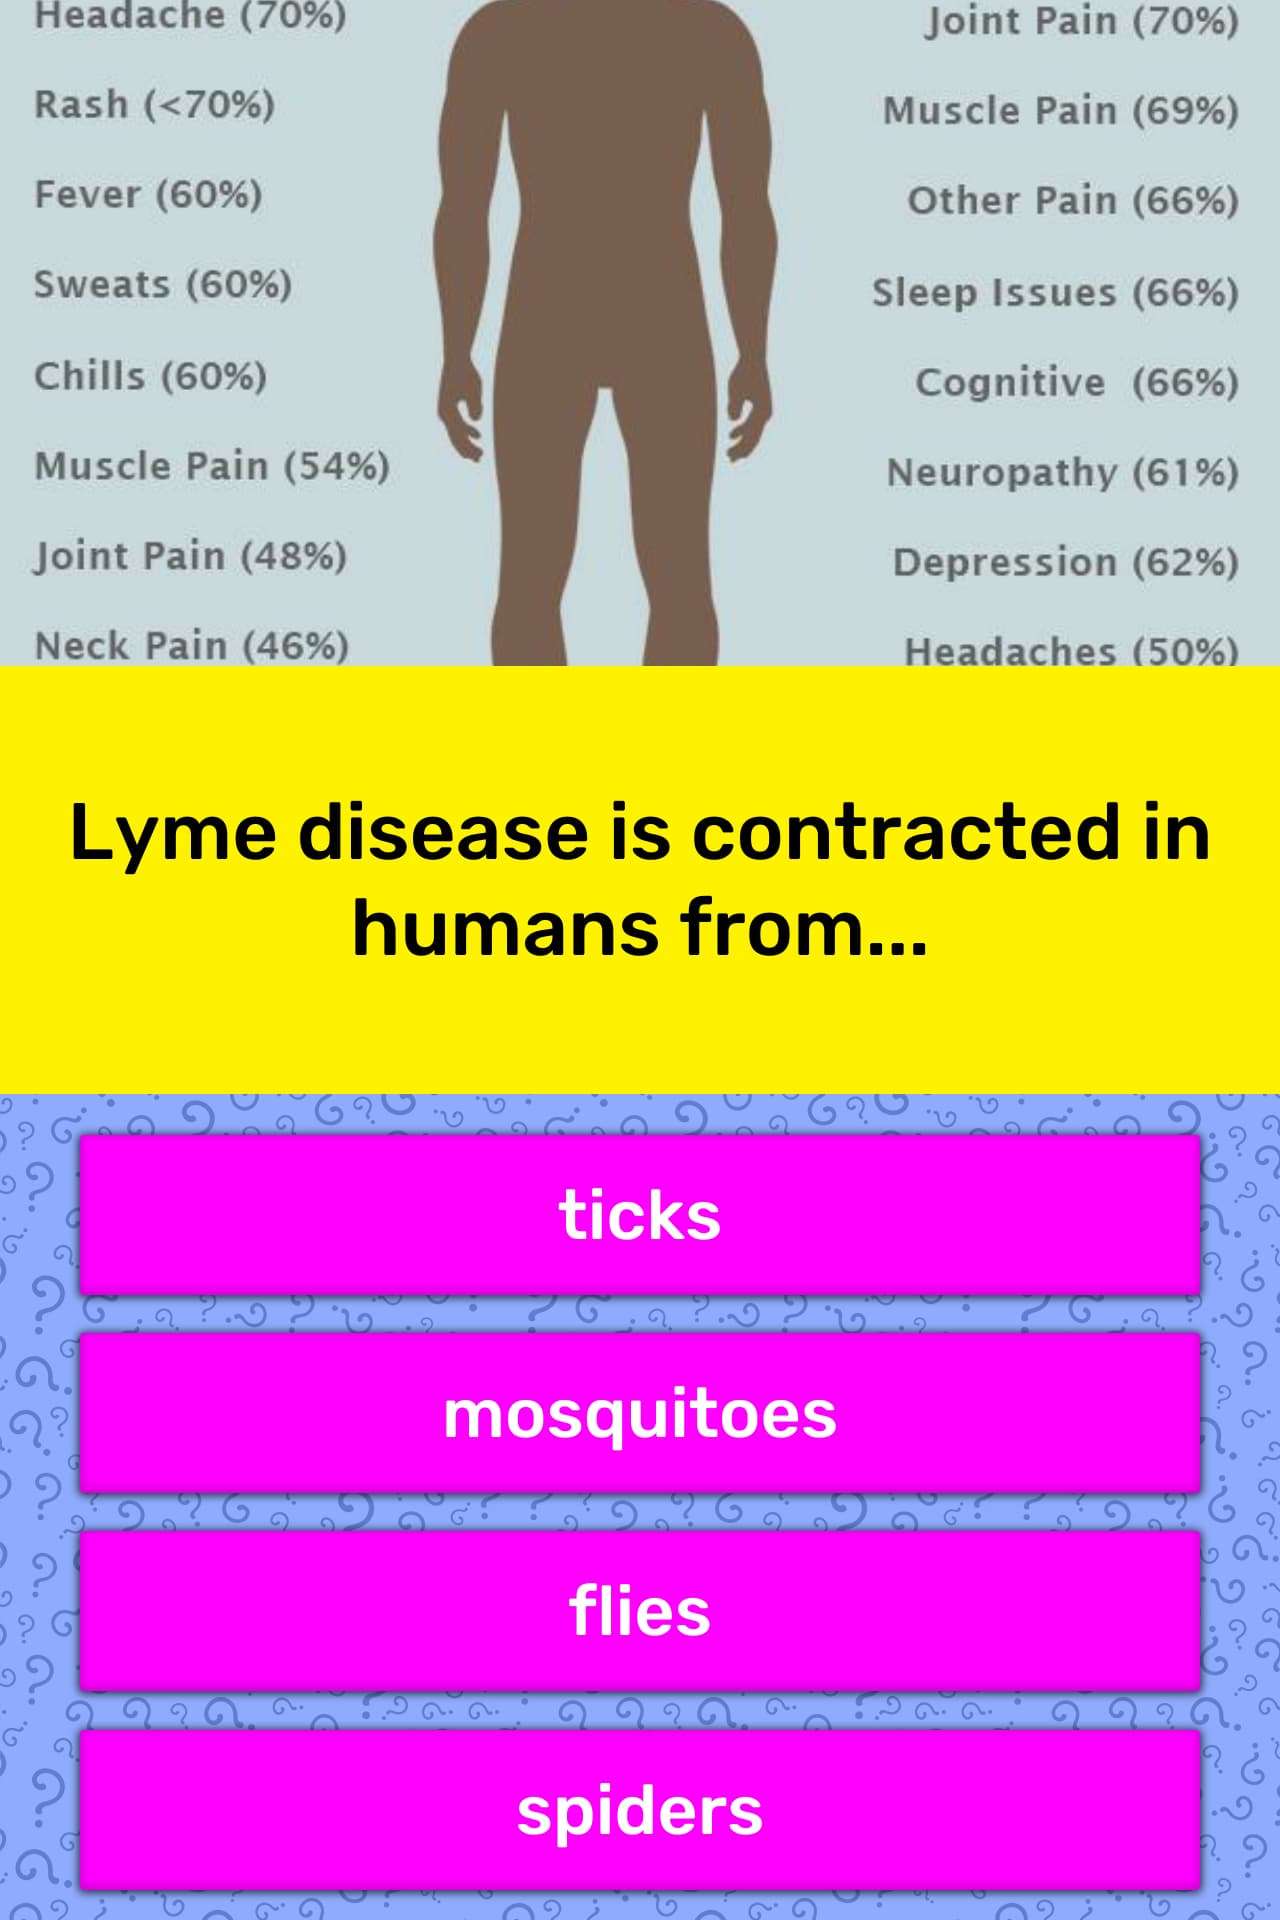 Lyme disease is contracted in humans...